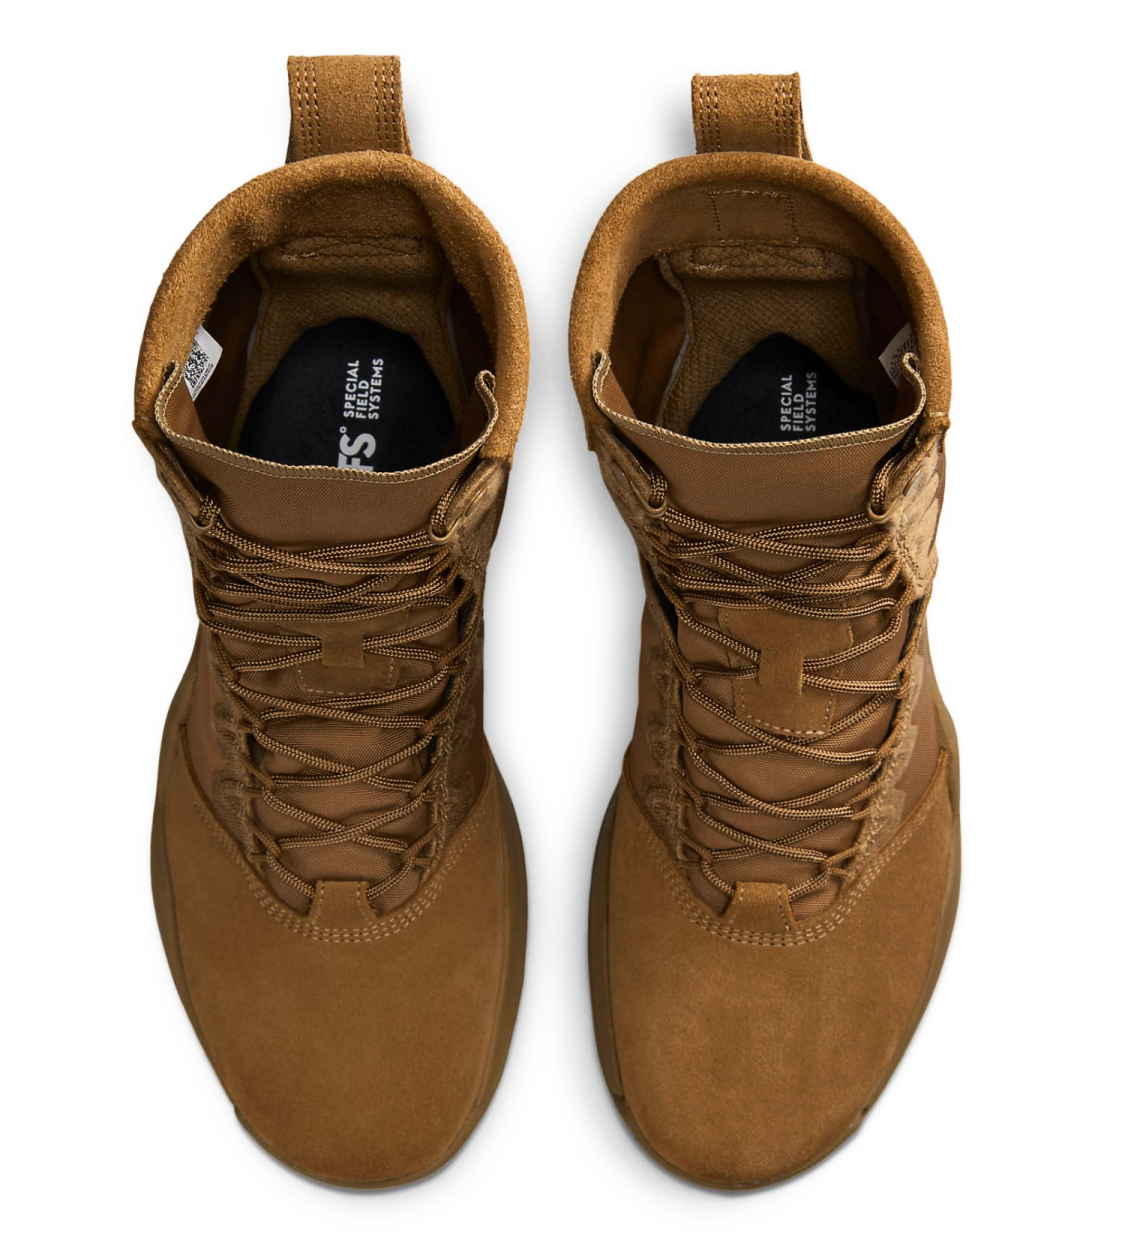 Nike SFB B2 Coyote Brown Leather Military Boots